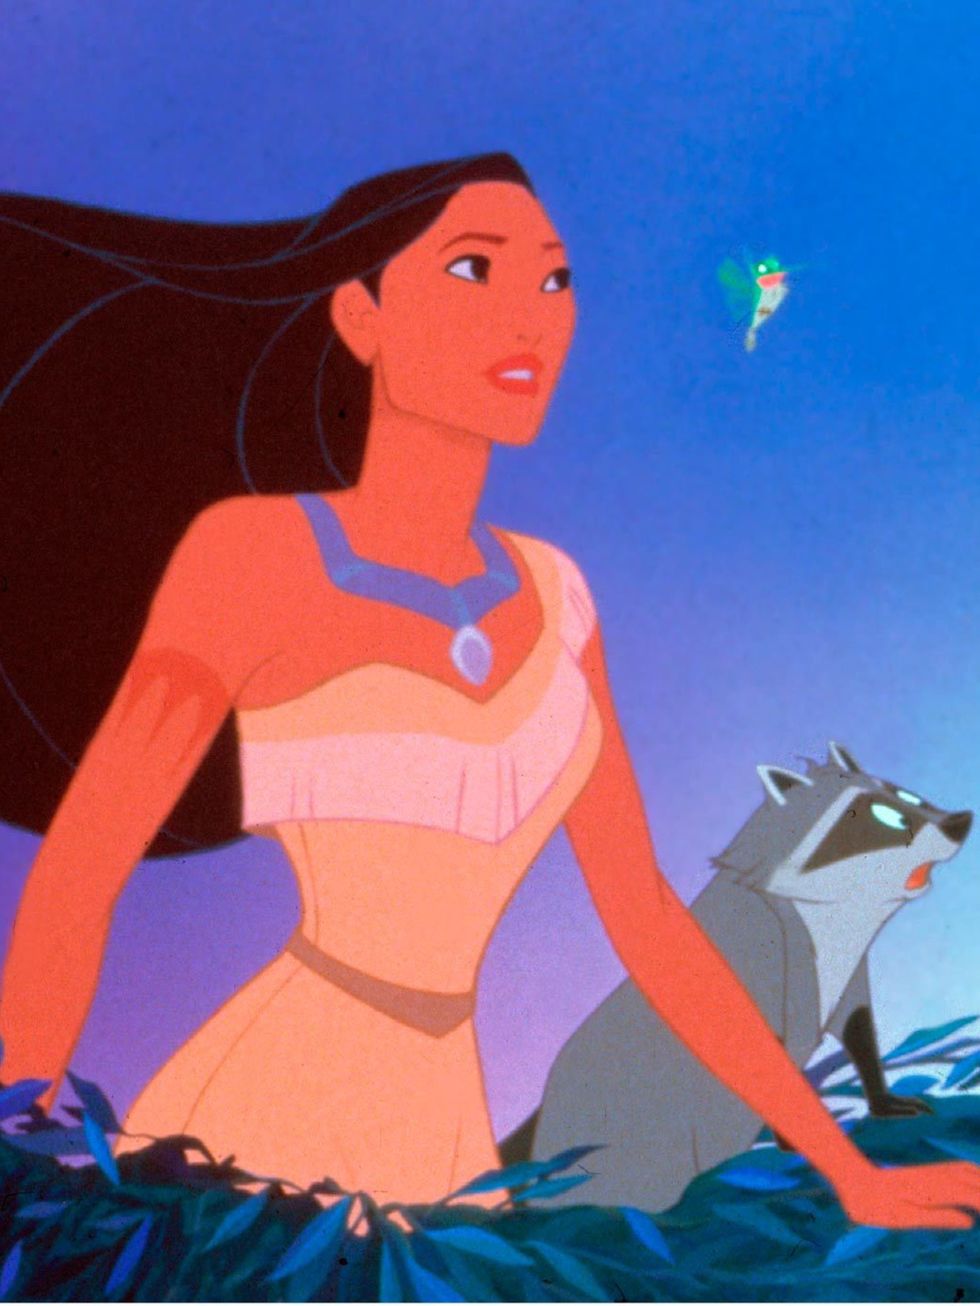 <p><strong>Pocahontas film screening & Q&A</strong> </p><p>Indulge your inner Disney princess this weekend and head to the BFI for an exclusive screening of Disneys 1995 classic Pocahontas. Fans will get the chance to meet screenwriter, Susannah Grant, w